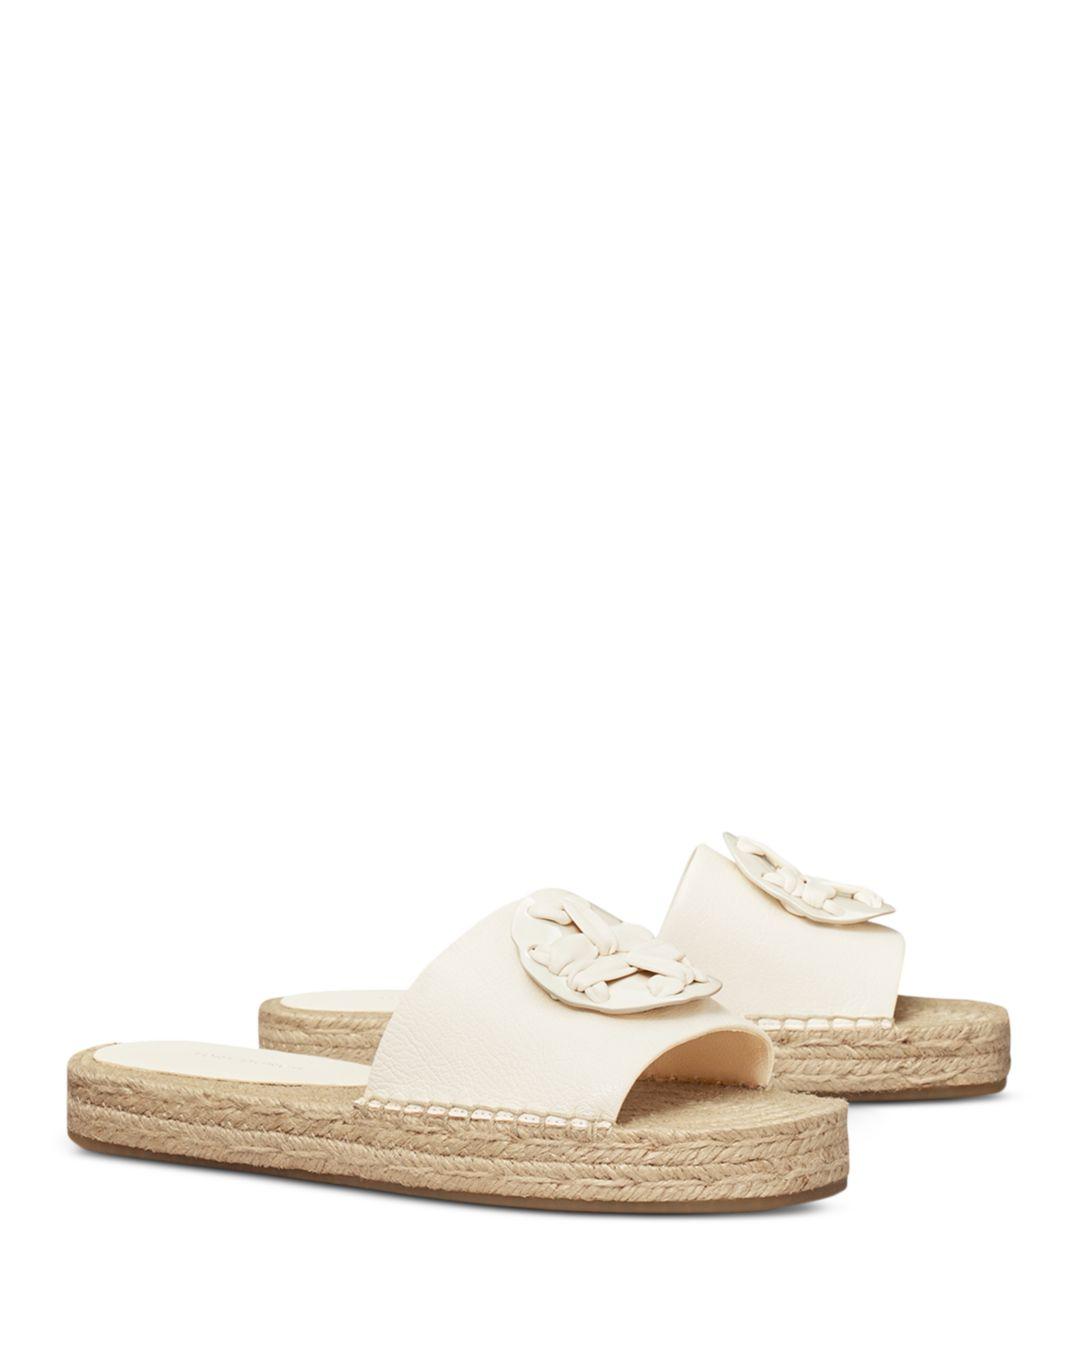 Tory Burch Woven Double T Espadrille Slide Sandals in Natural | Lyst